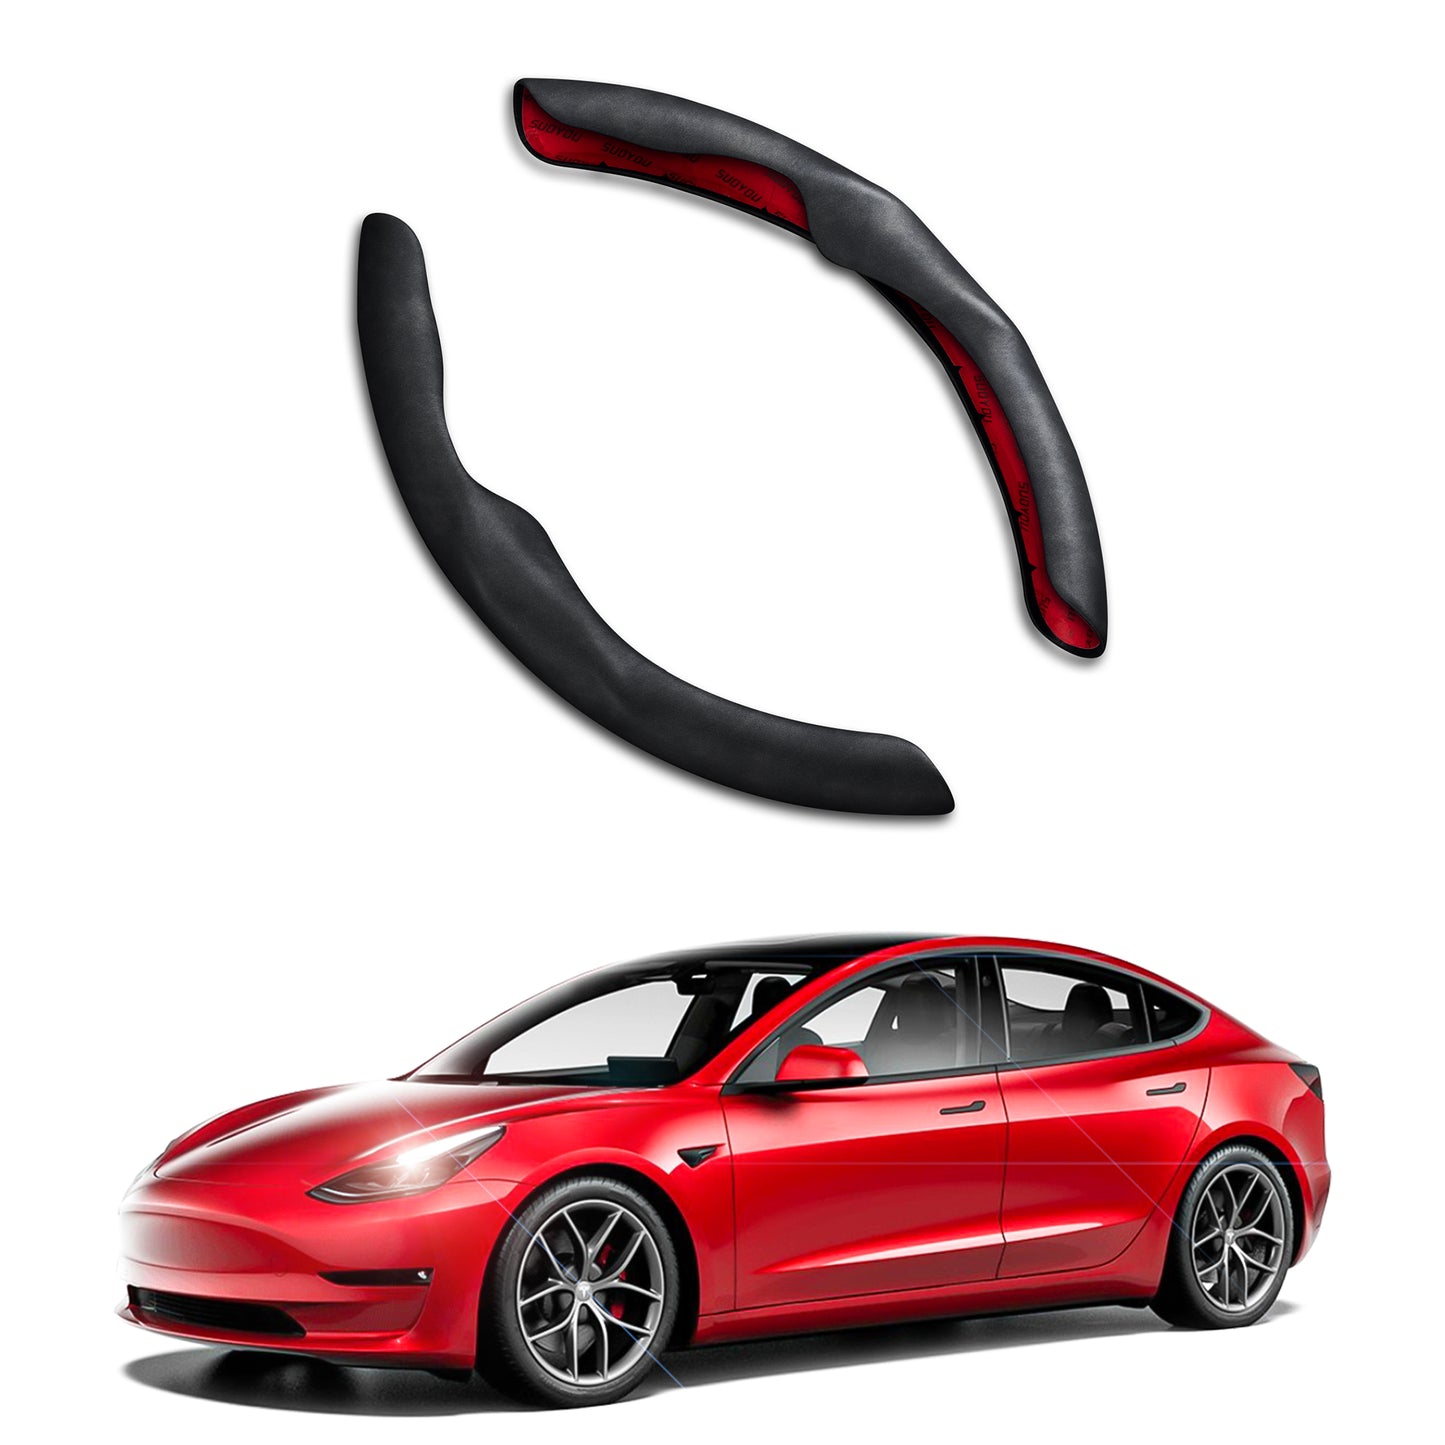 tesla model 3 Y S X car 2022 2023 2021 2020 2019 2018 s3xy Segmented Steering Wheel Cover for all Vehicles arcoche accessories accessory aftermarket price Vehicles standard long range performance sr+ electric car rwd ev interior exterior diy decoration price elon musk must have black white red blue 5 7 seats seat